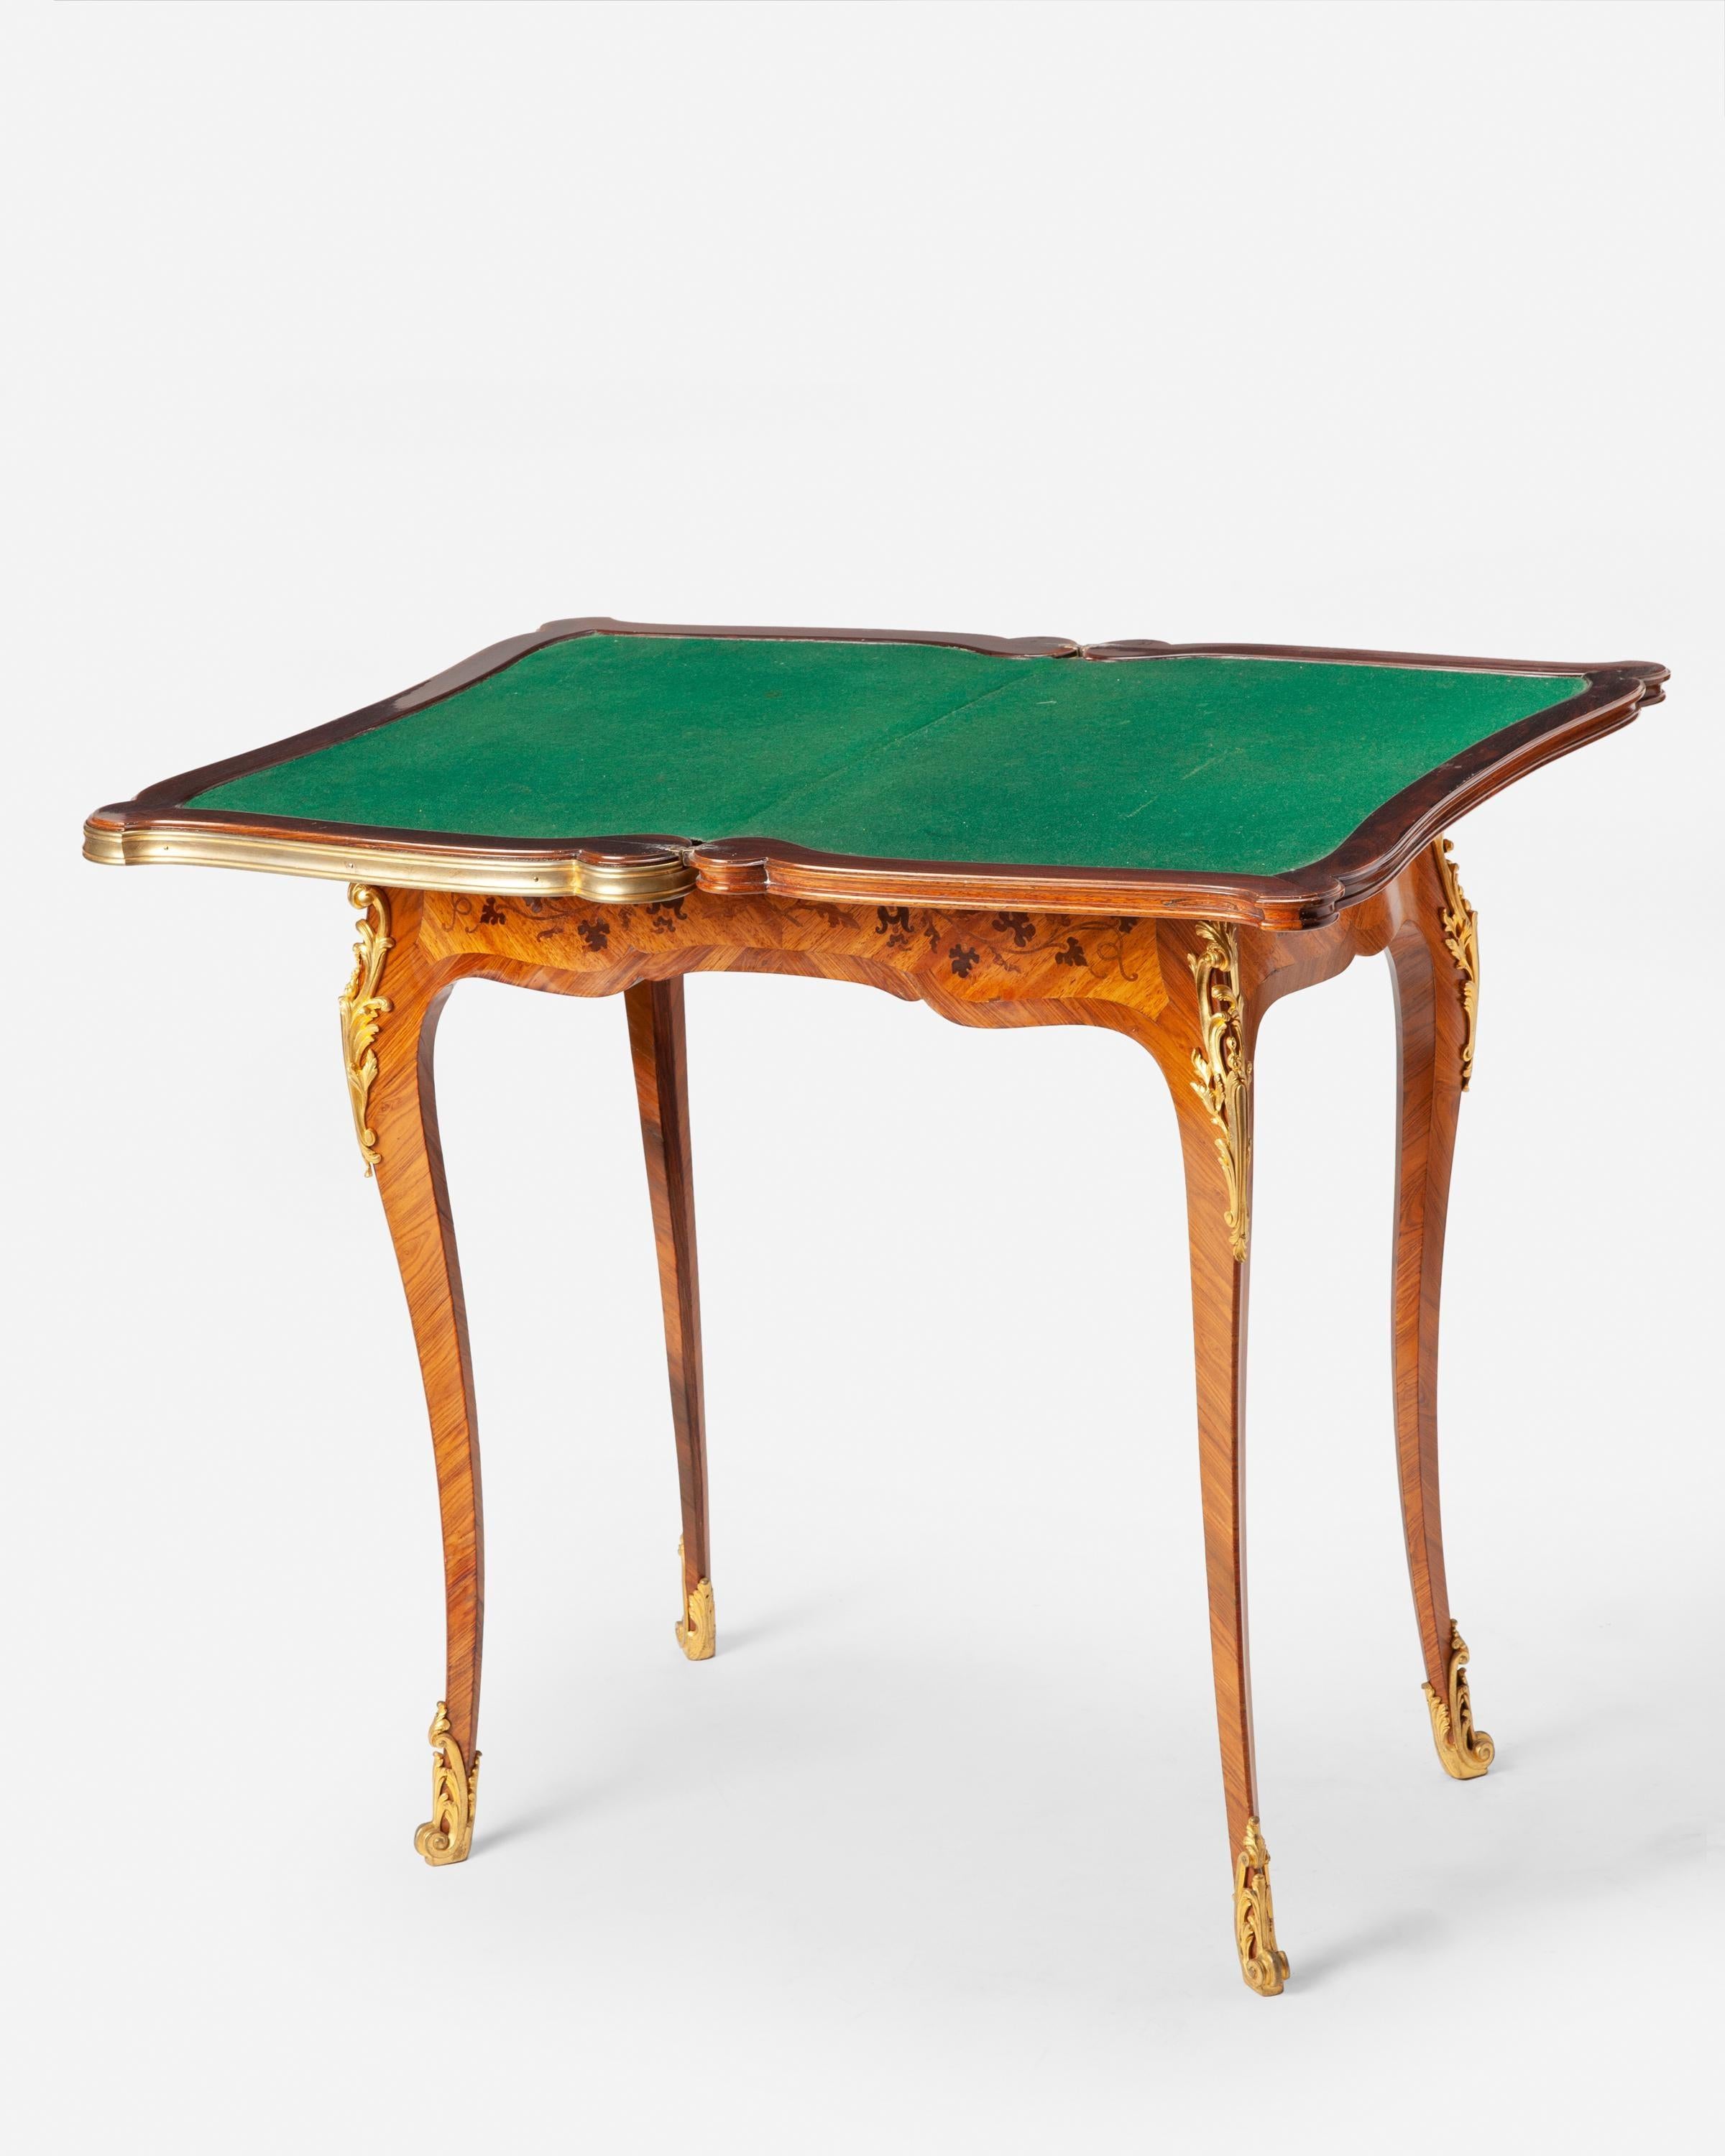 Fourth-quarter 19th century 
 Signed to one bronze mount: F. Linke 
 The flip-top game table with floral marquetry inlay, green felt interior surface, and gilt-bronze mounts raised on four cabriole legs with sabots to the feet 
 Open: 29.25